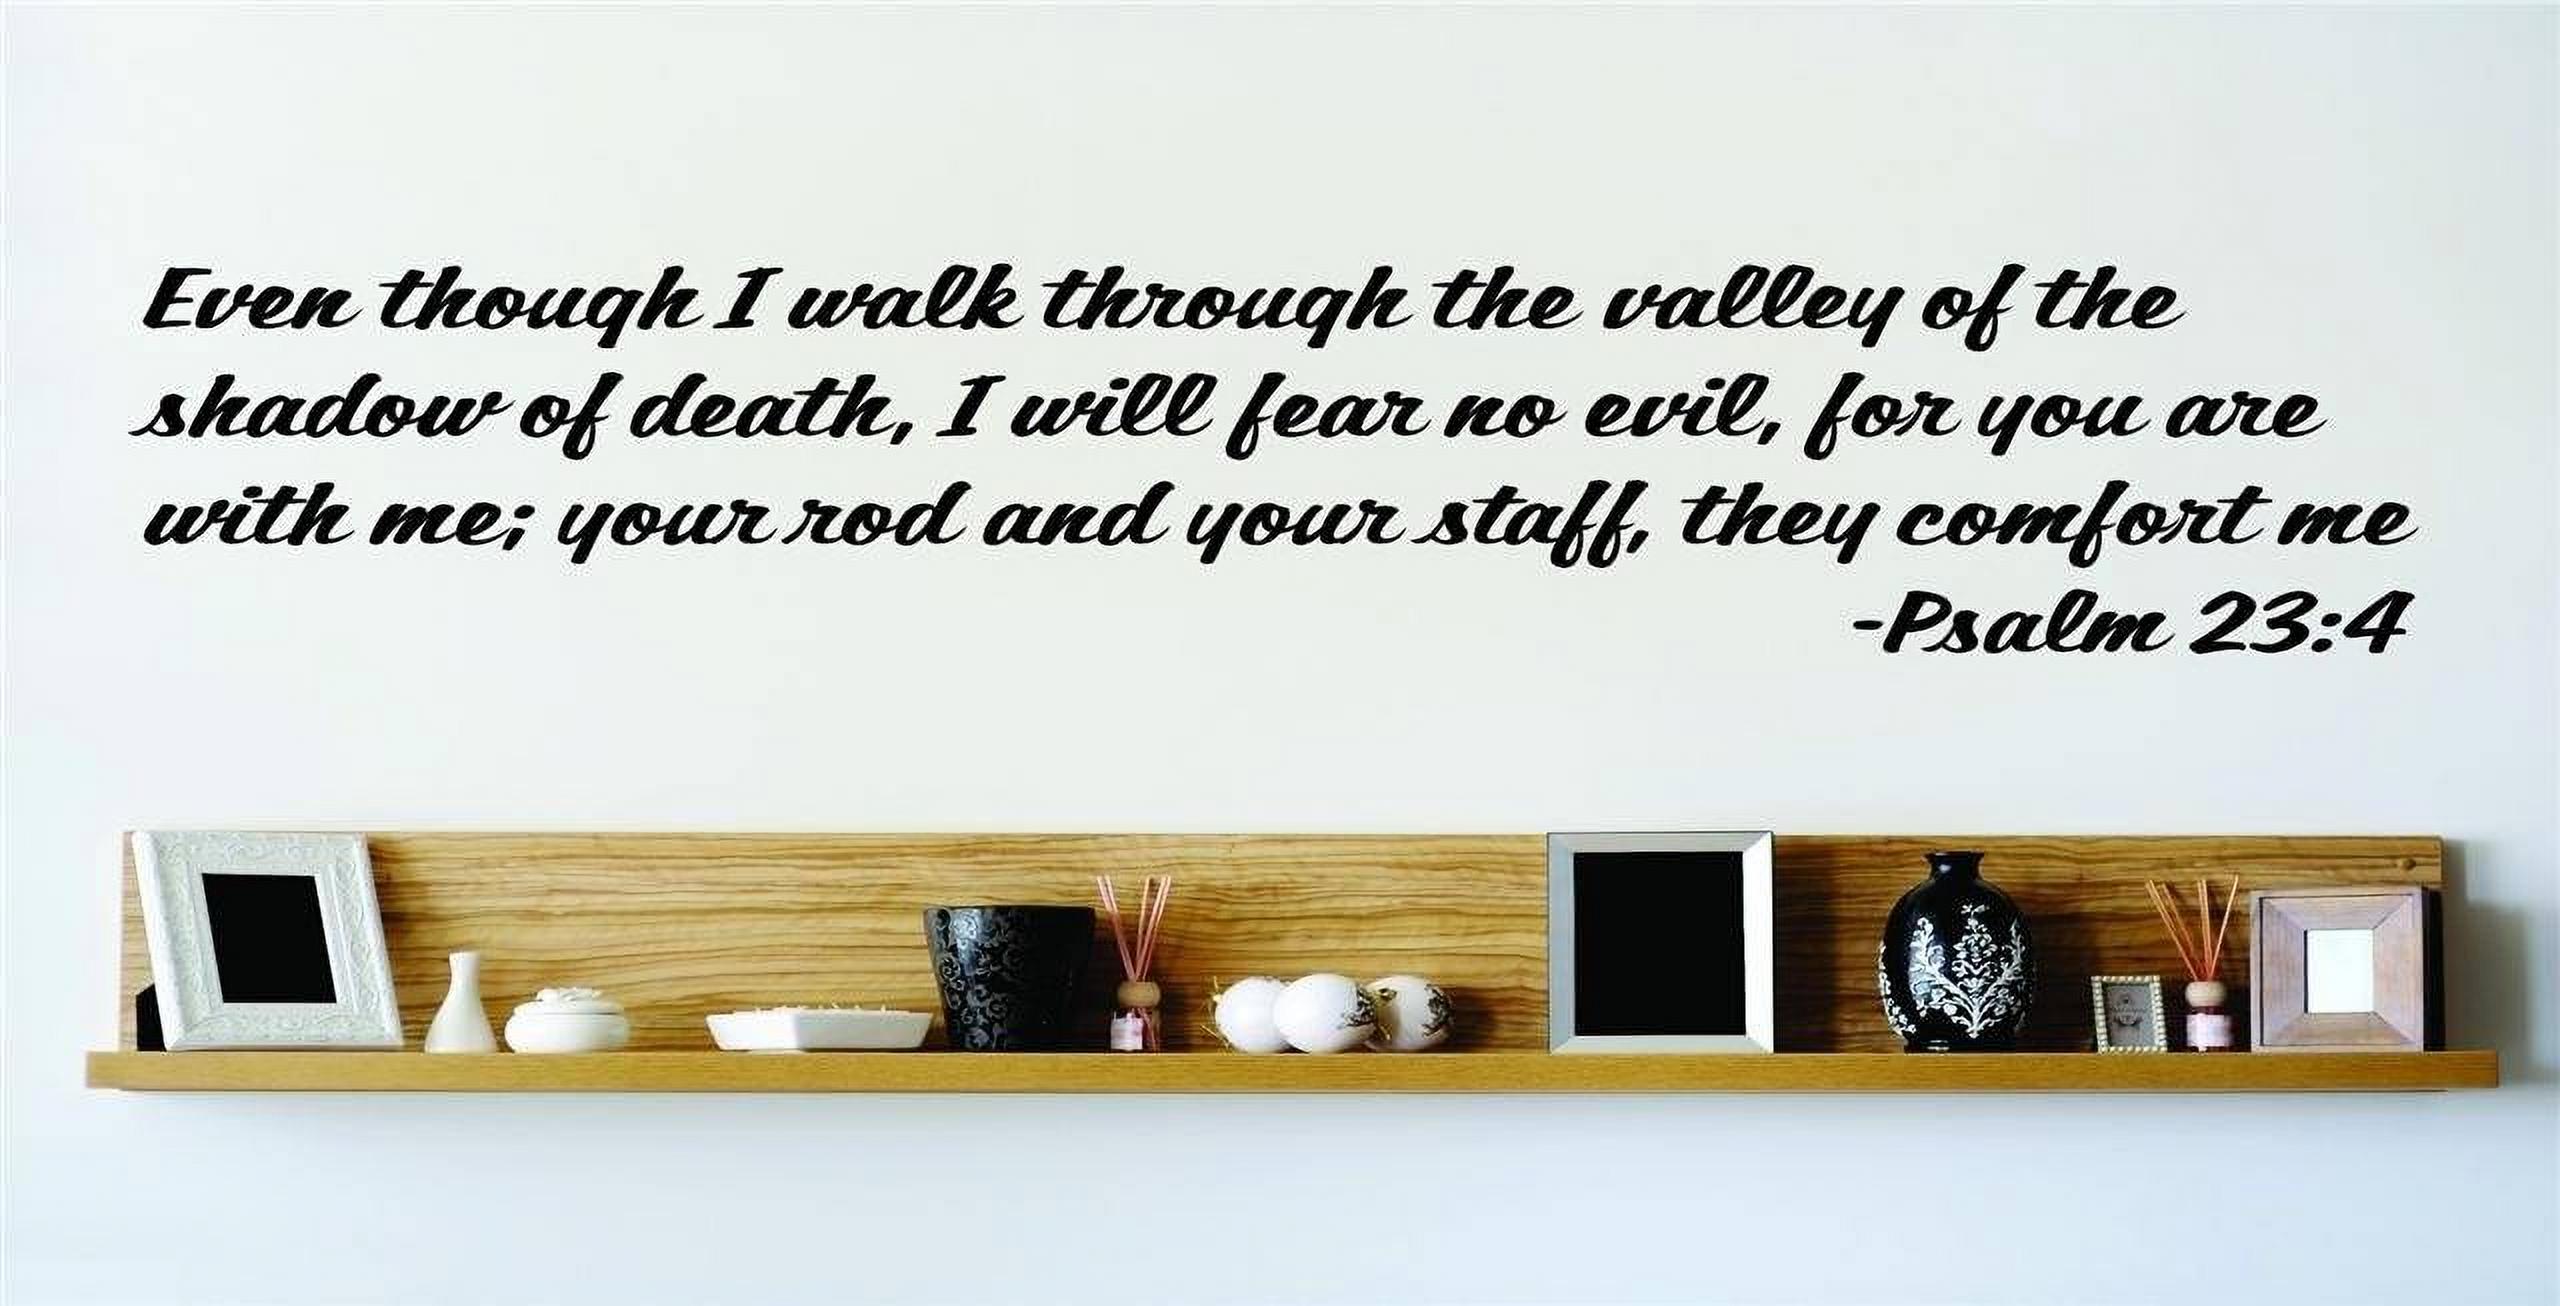 Custom Decals Even Though I Walk Through The Valley Of The Shadow Of Death, I Will Fear No Evil Psalm 234 Bible Quote 15x15 - image 1 of 1